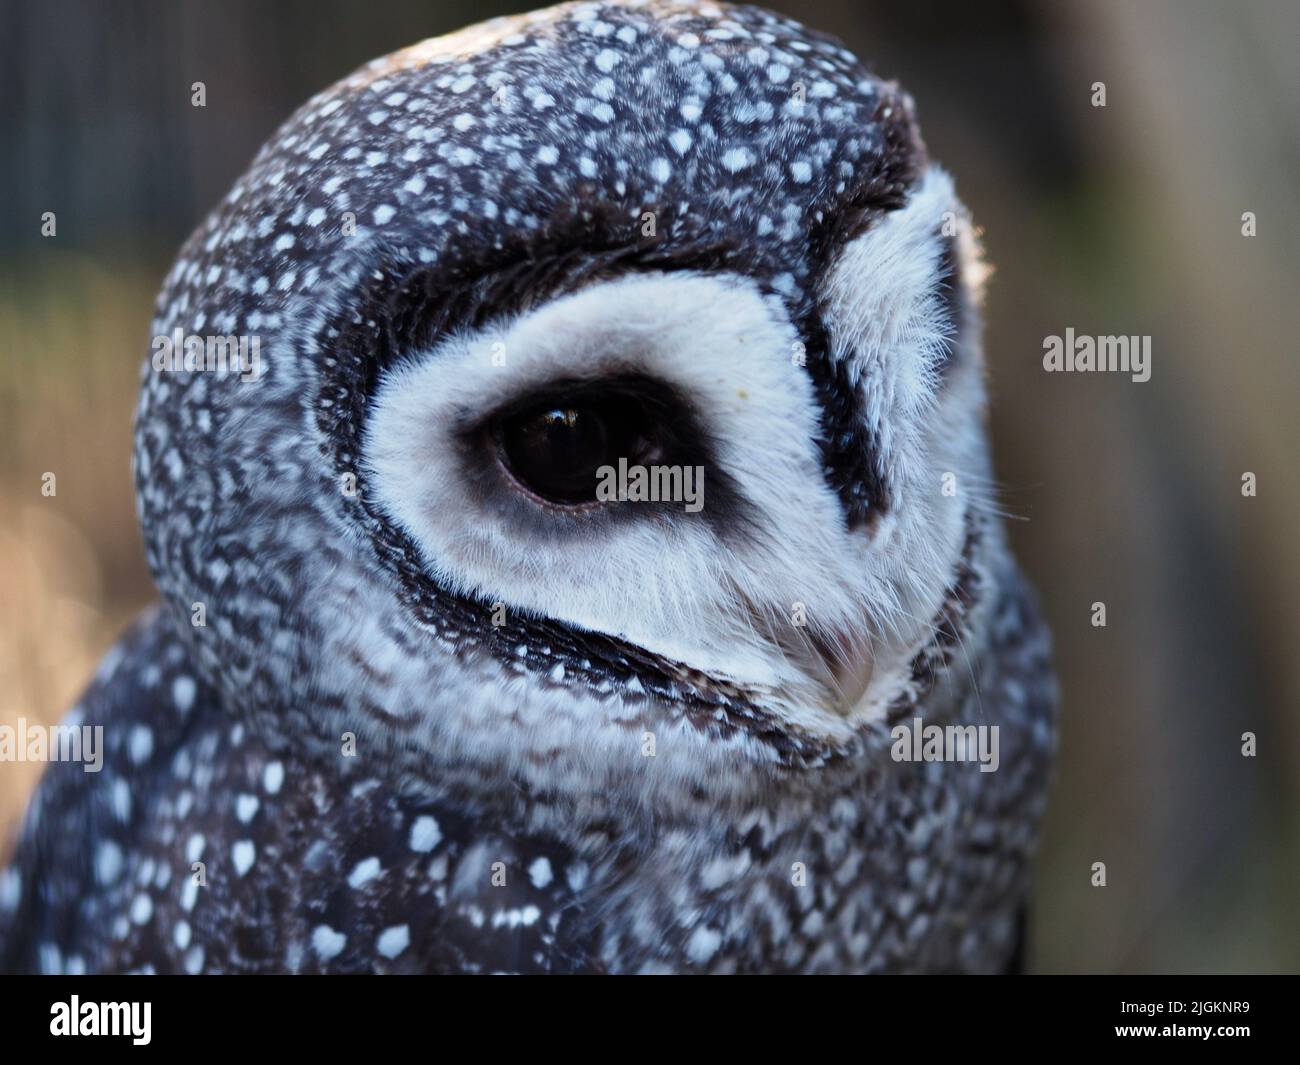 A closeup portrait of a impressive Lesser Sooty Owl with glorious speckled plumage. Stock Photo